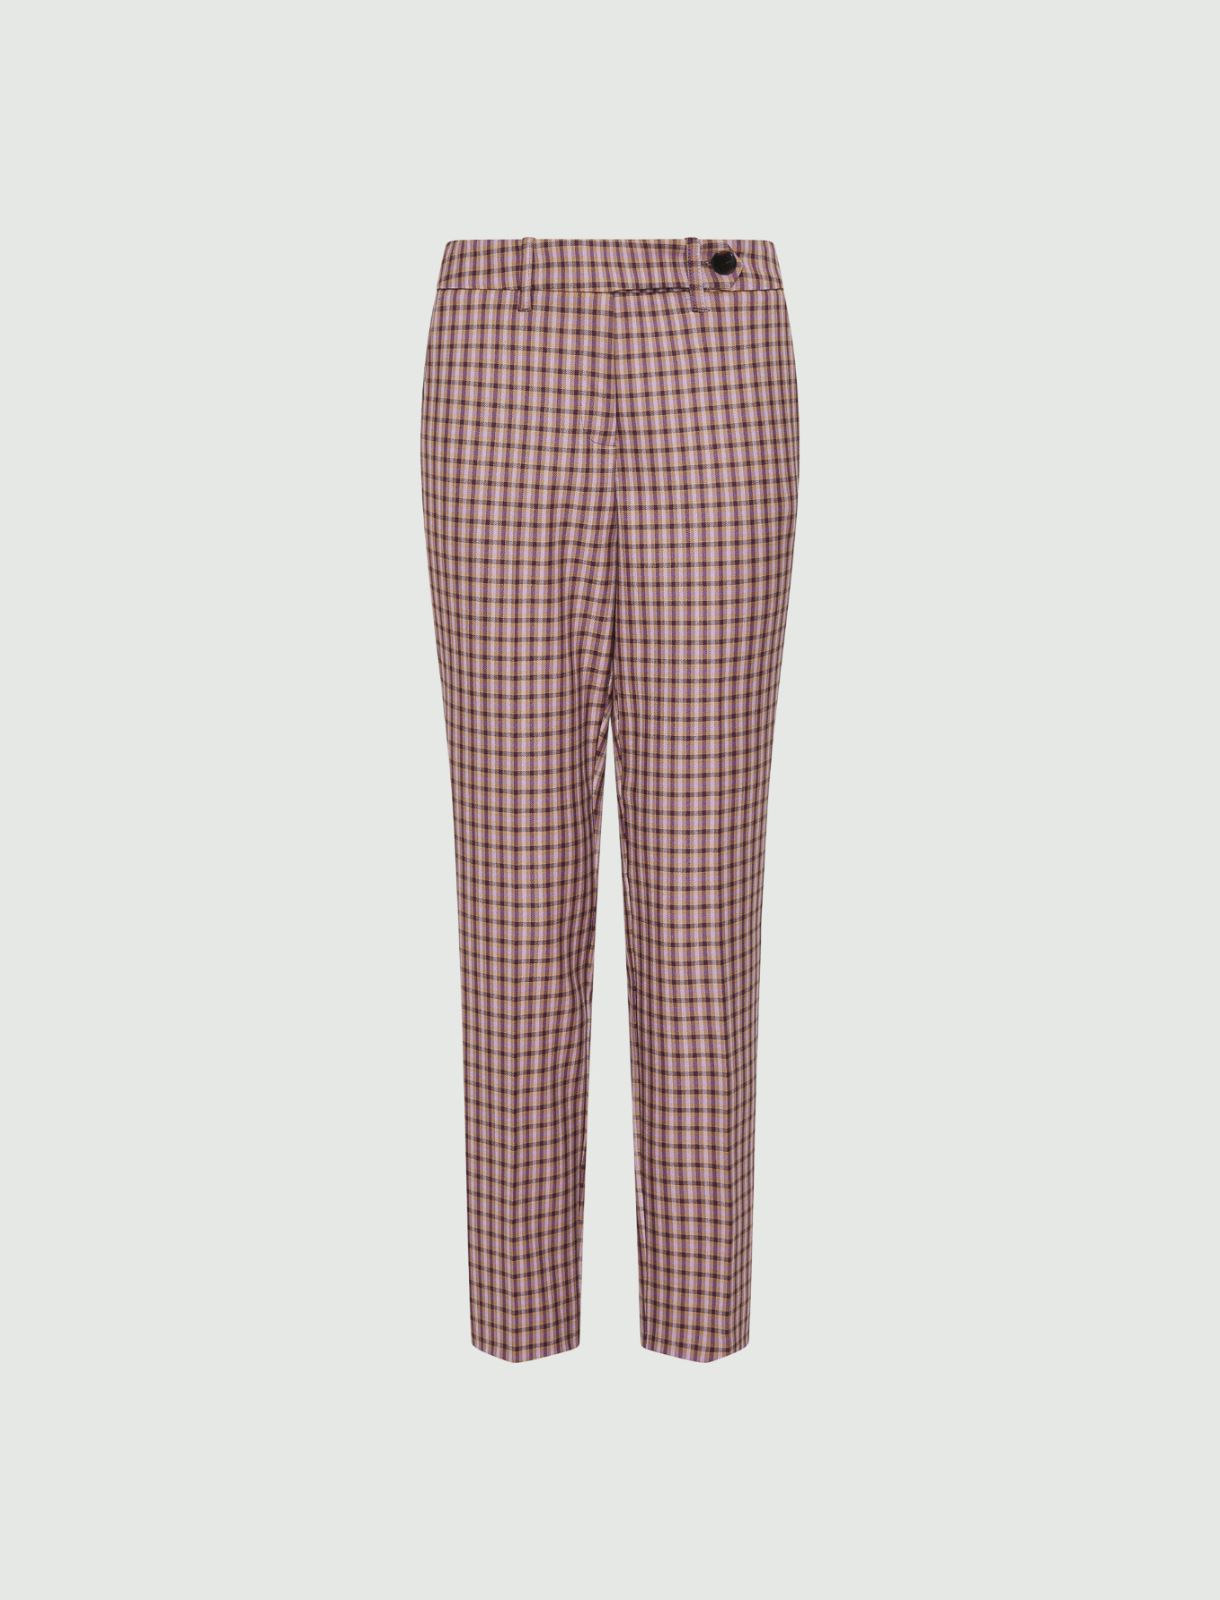 Carrot-fit trousers - Must - Marella - 5